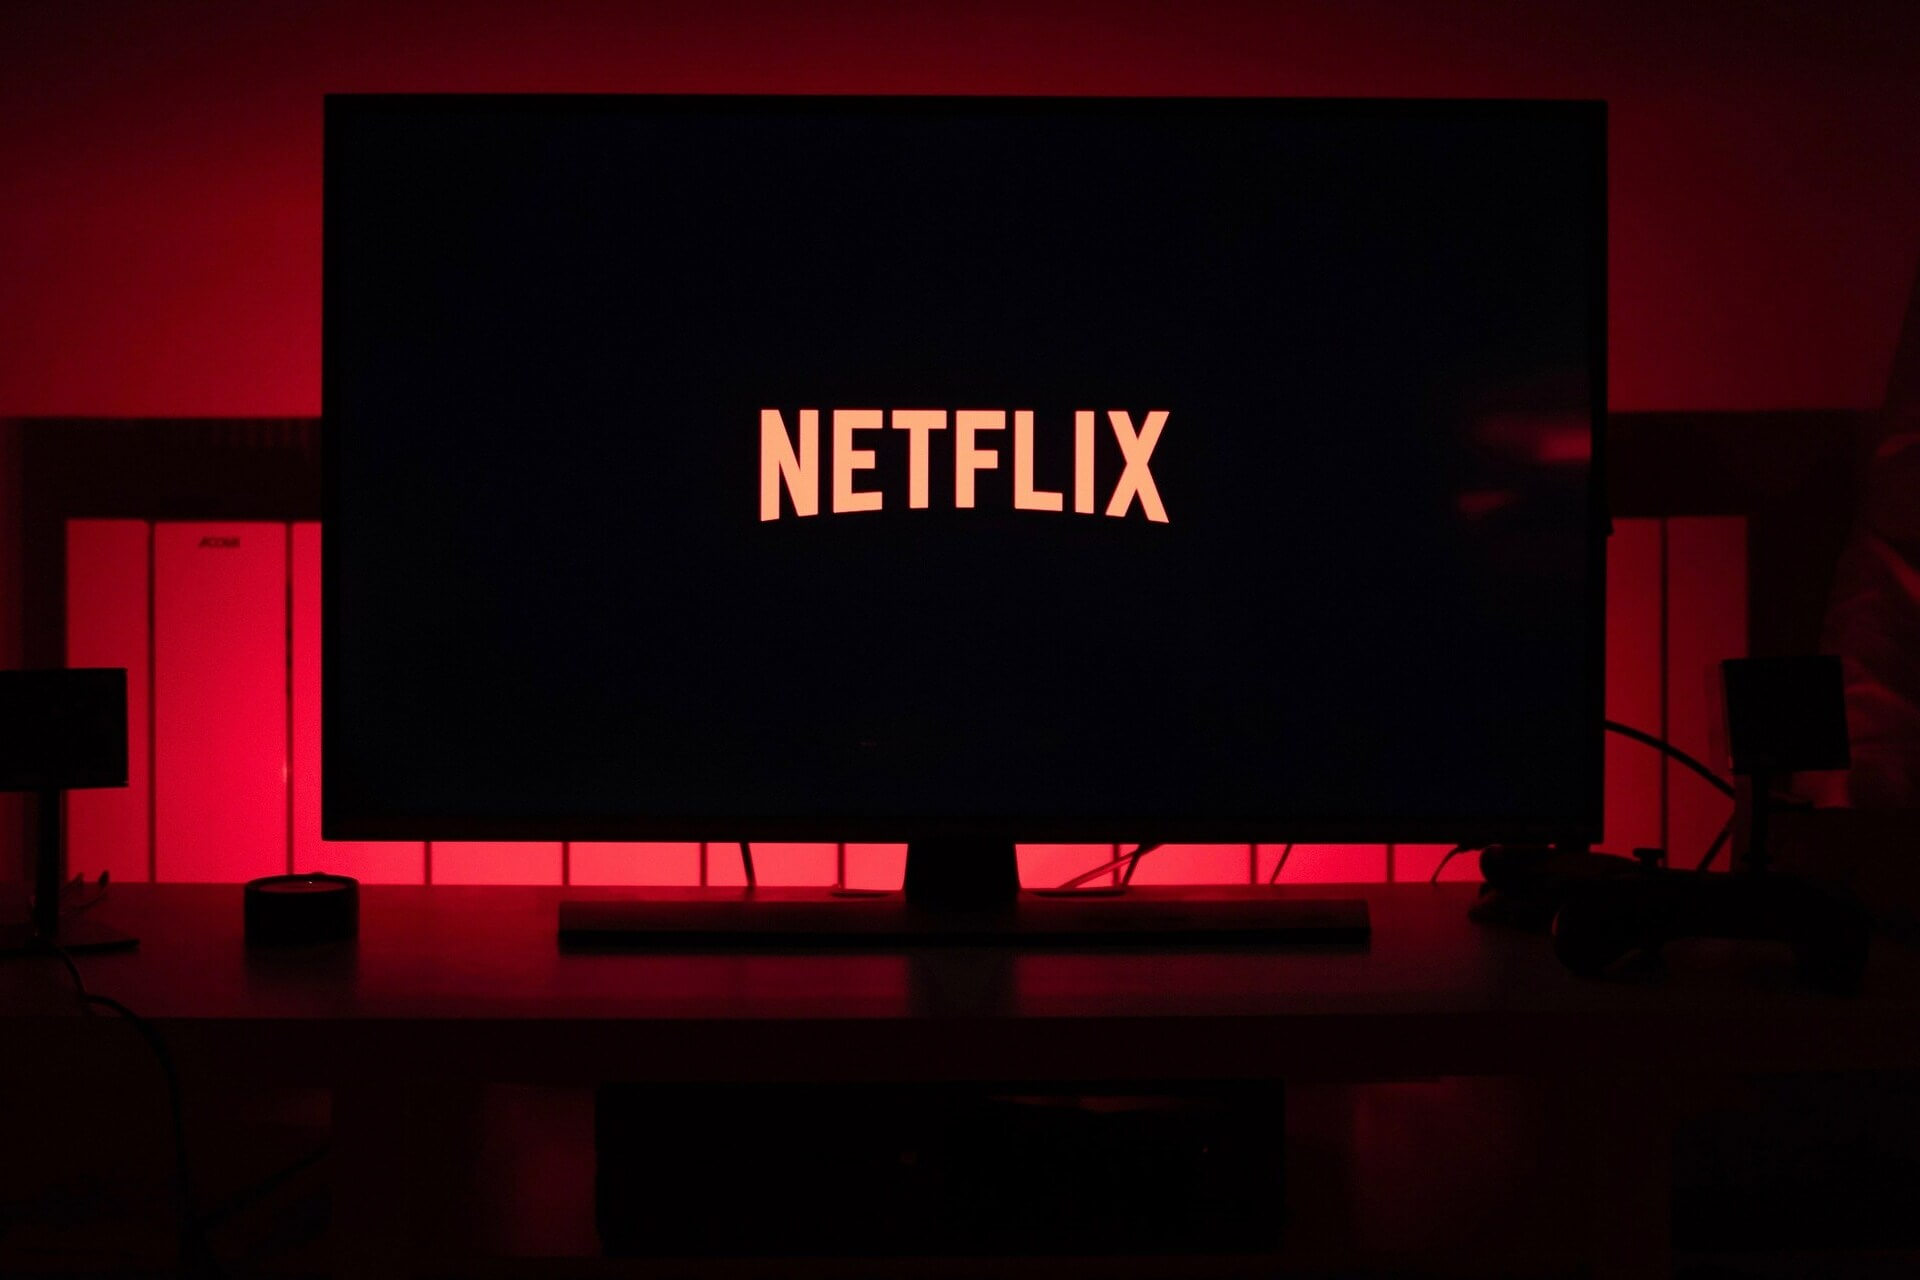 How to Fix Netflix Error Code NW-3-6? Easy Guide [December 2023]